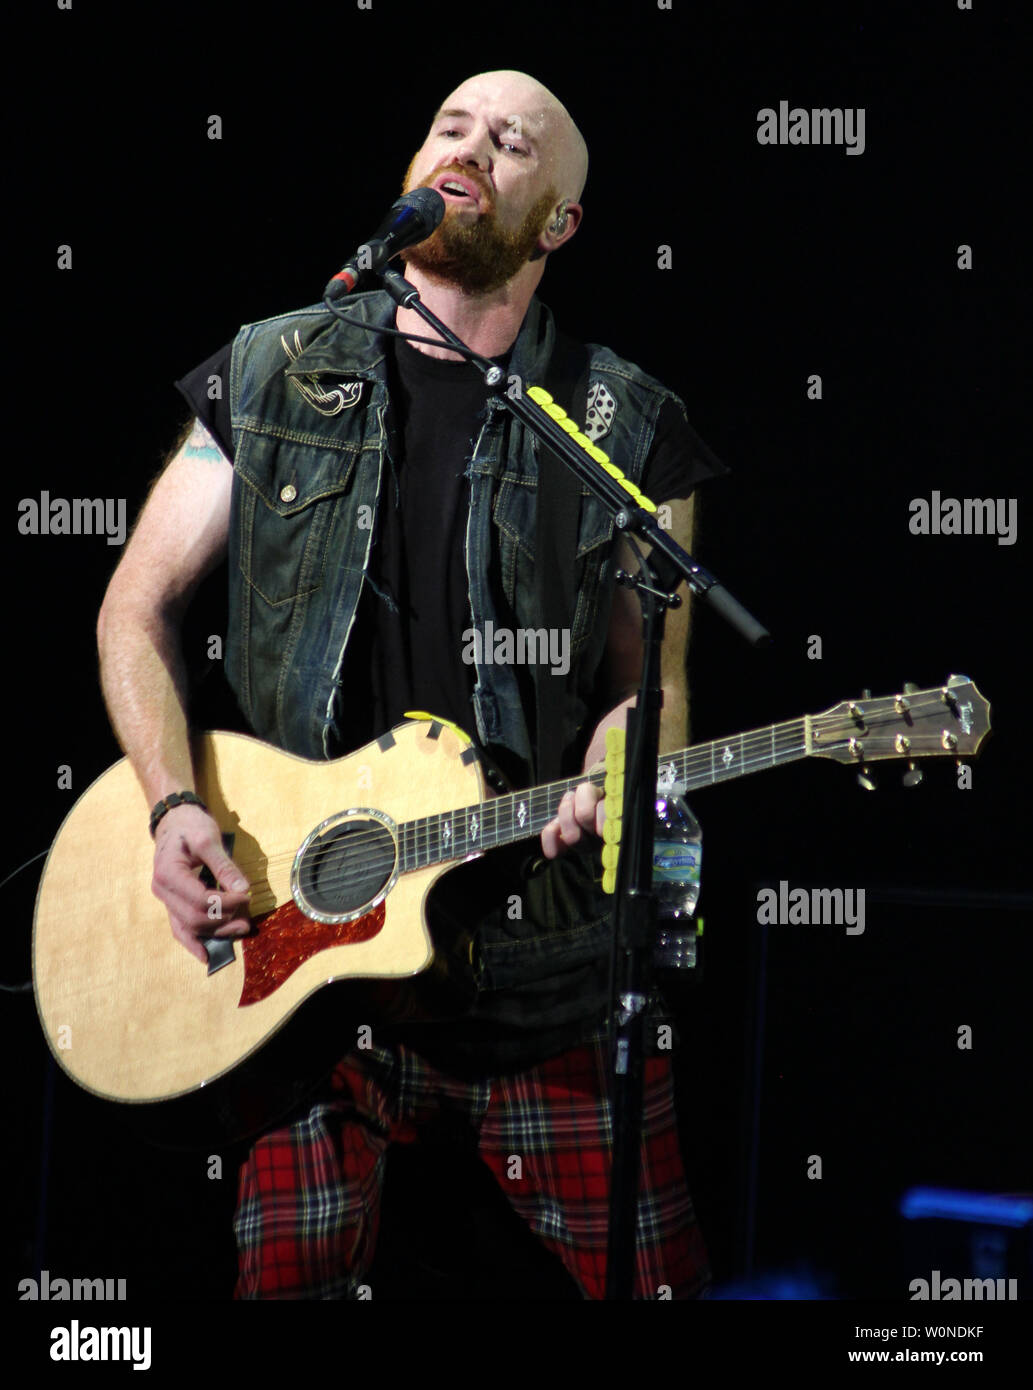 Mark Sheehan with The Script performs in concert at the Cruzan Amphitheatre in West Palm Beach, Florida on August 17, 2014. UPI/Michael Bush Stock Photo